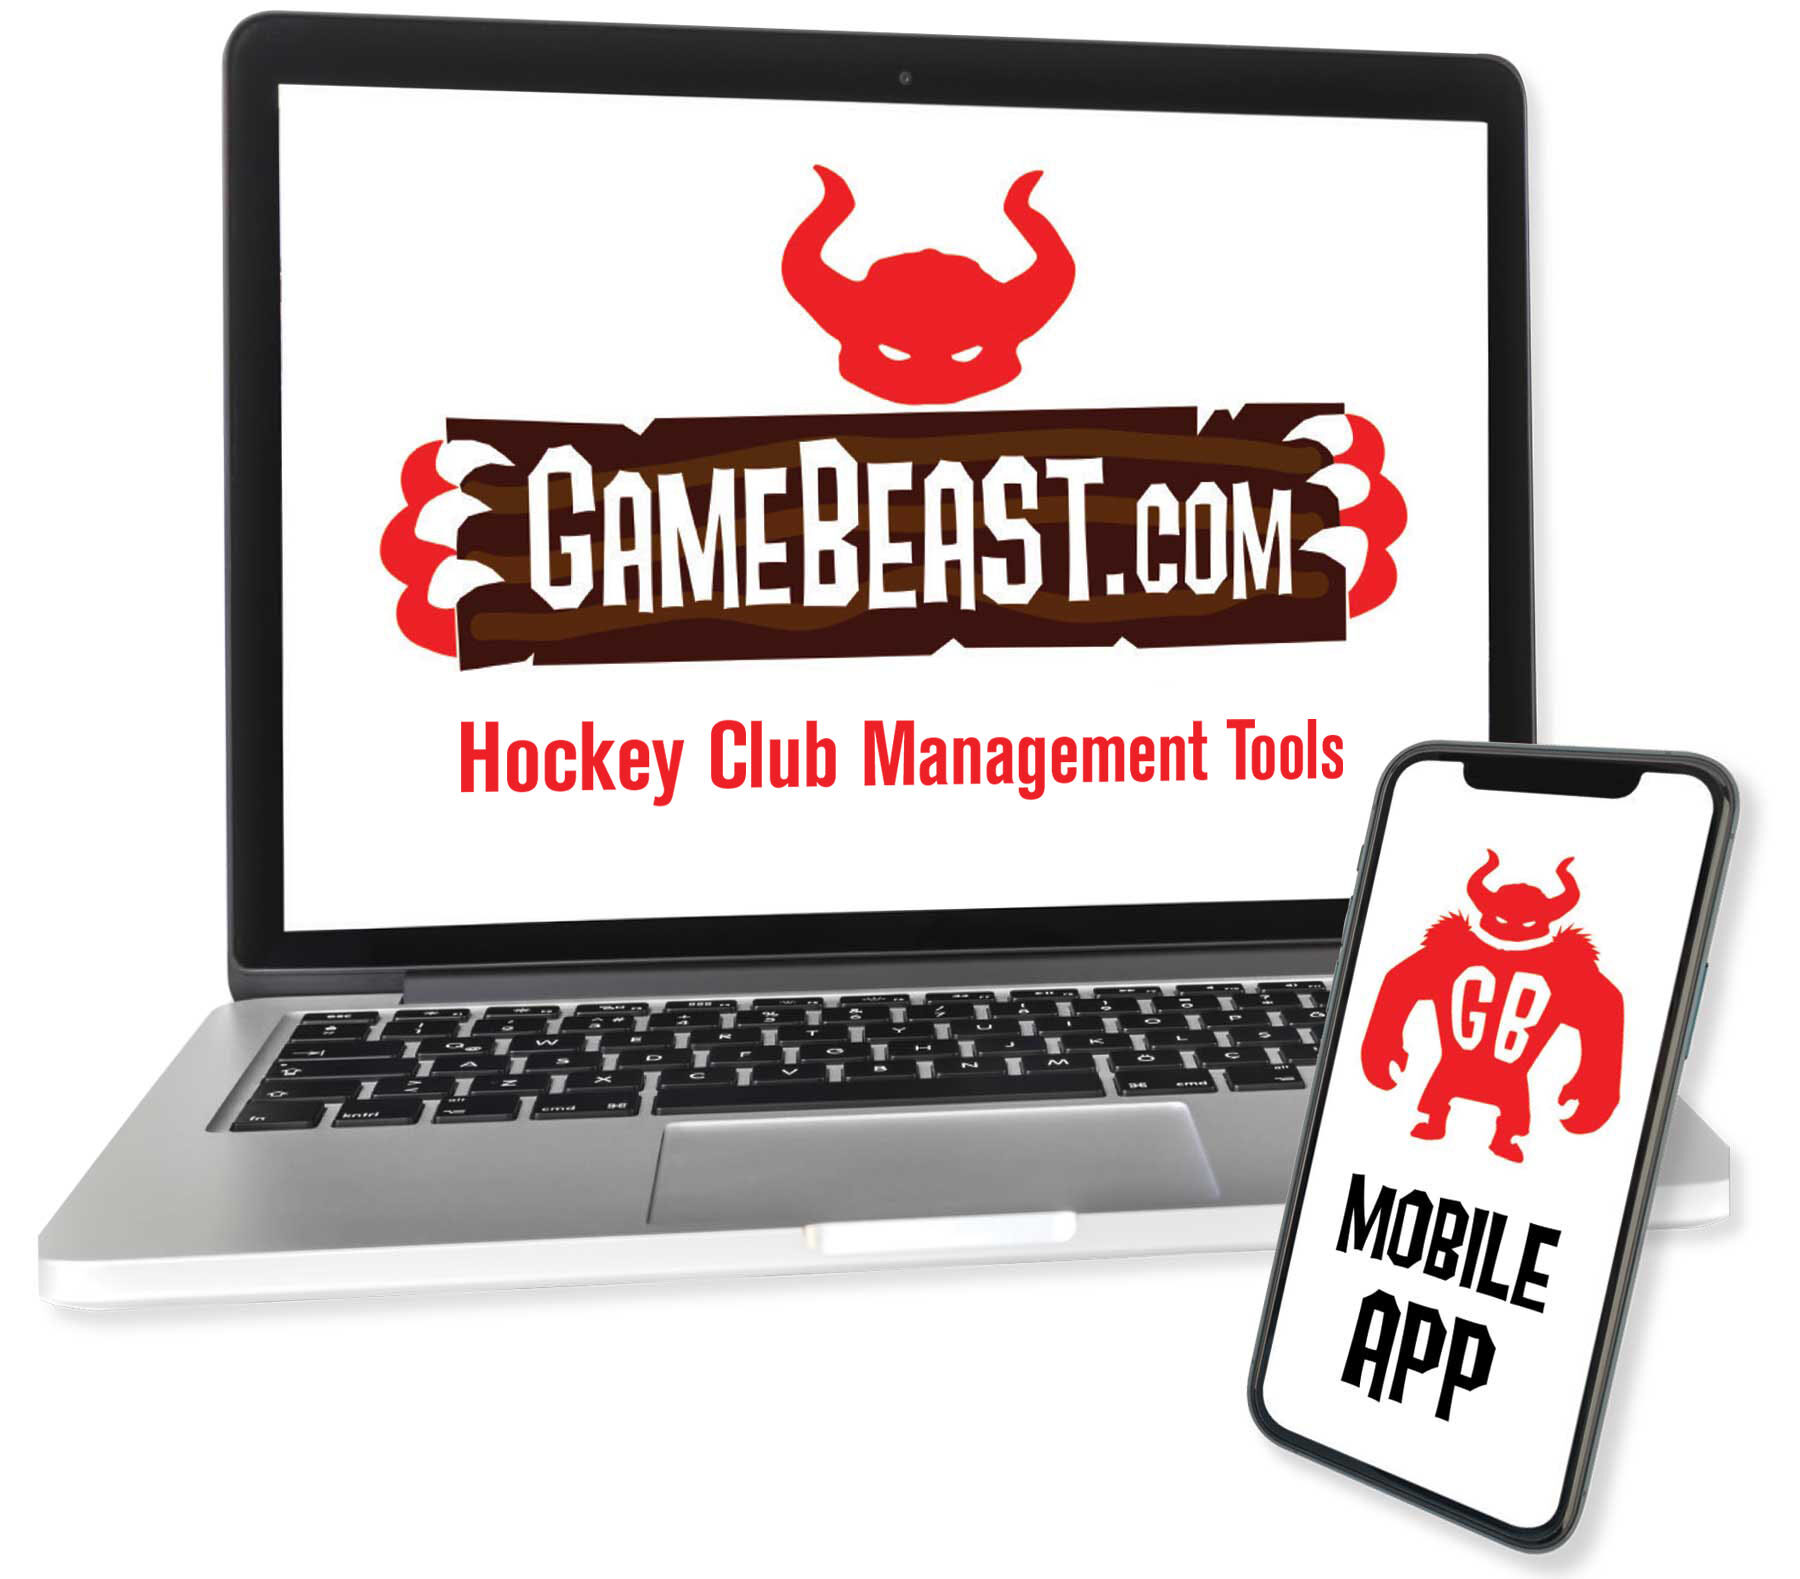 GameBeast-Software on a laptop computer and The GameBeast App